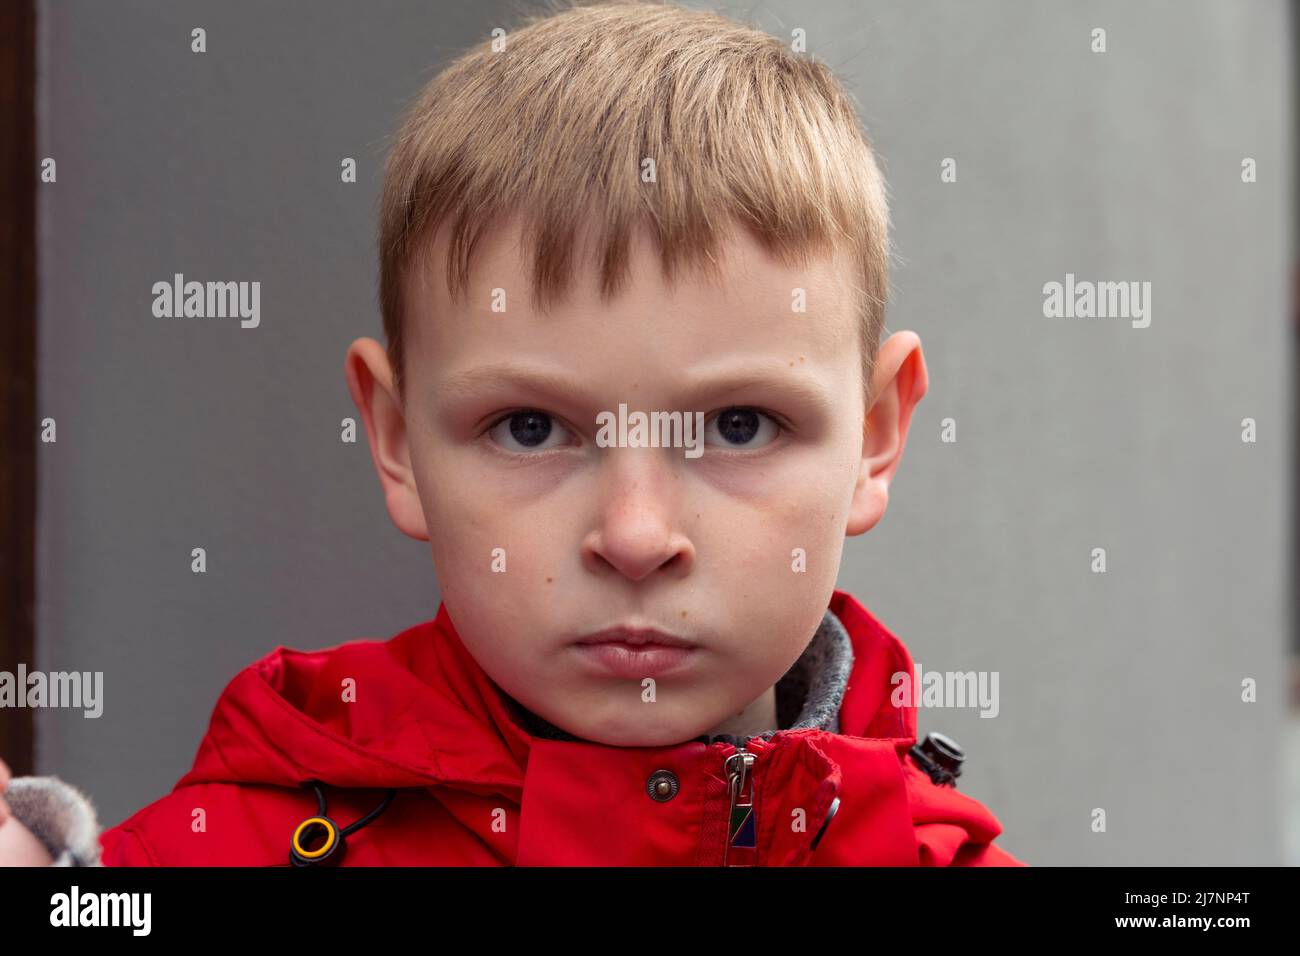 The serious boy. Serious Face of a boy in a red jacket. Portrait of a caucasian boy. Stock Photo